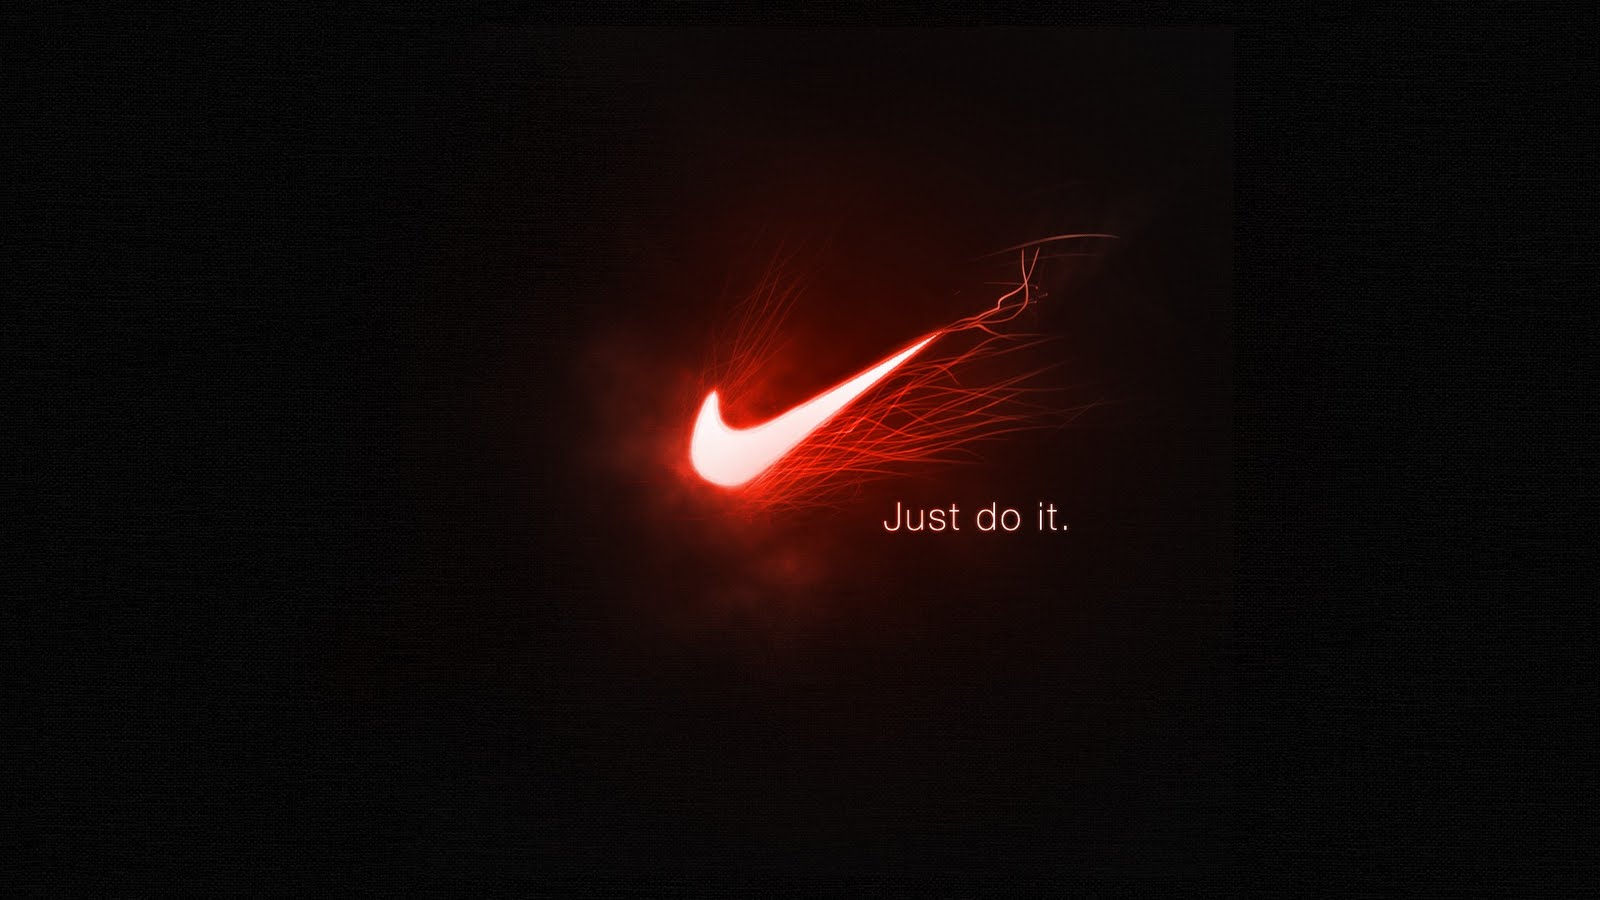 Nike 3D Backgrounds